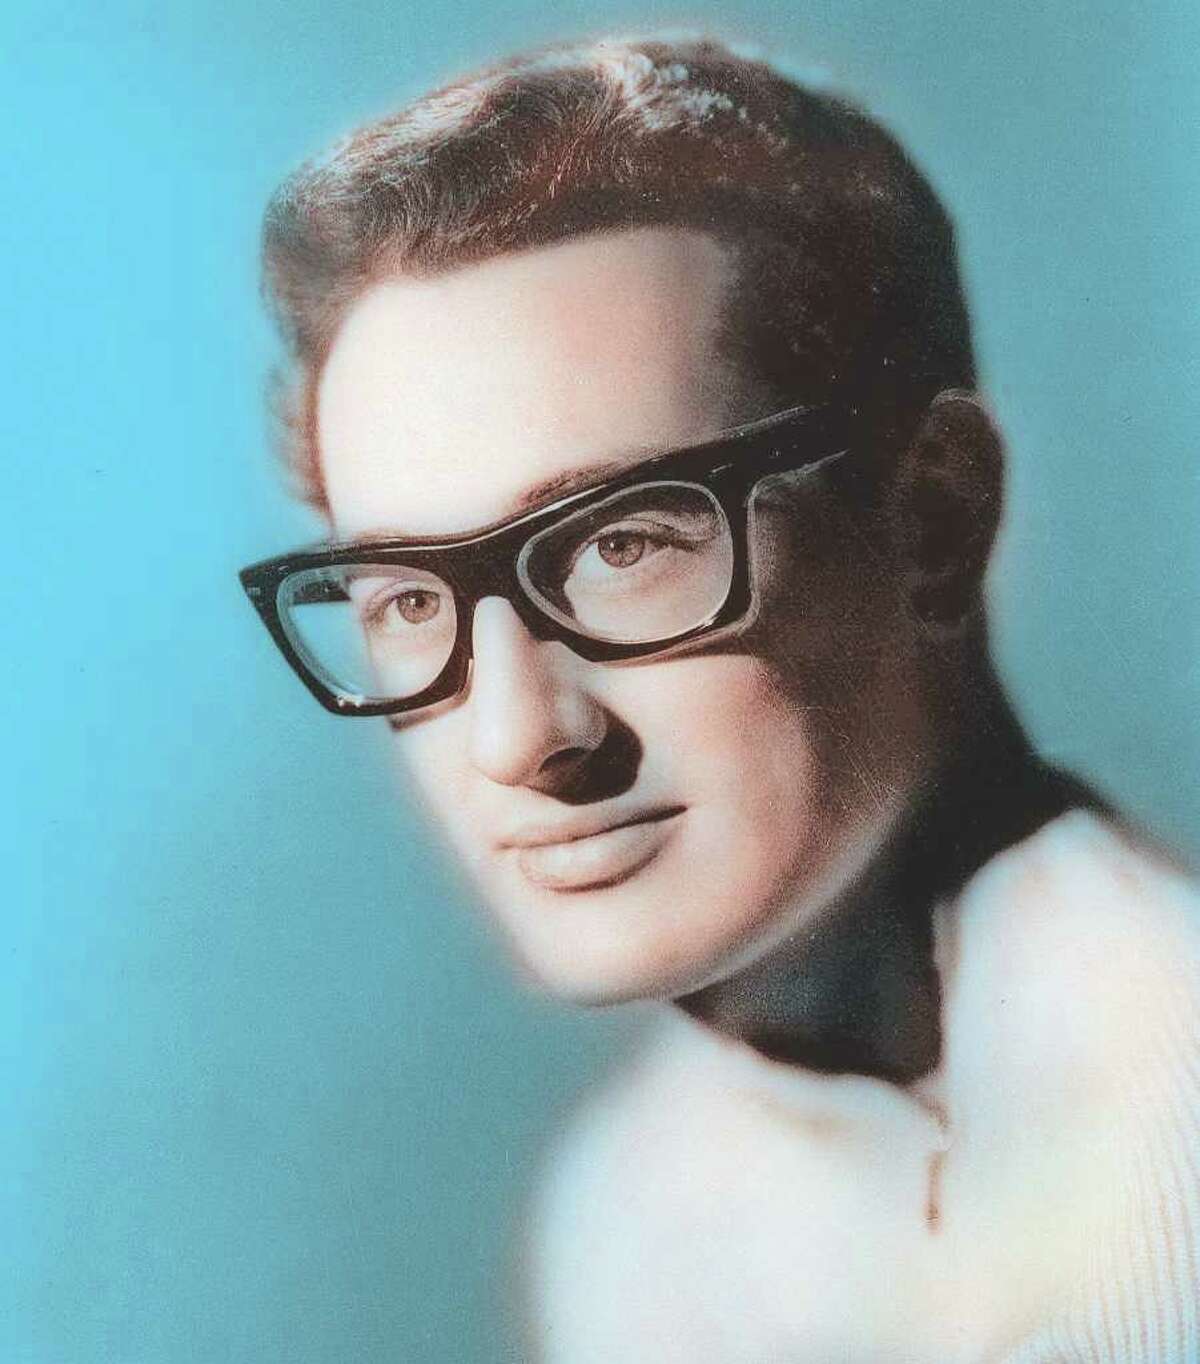 This is an undated file photo of Buddy Holly who died in 1959. For thousands of '50s rock 'n' roll fans who travel each year to the Surf Ballroom in Clear Lake, Iowa, the music lives on and remains reason for an annual celebration to honor Holly, Ritchie Valens and J.P. ``The Big Bopper'' Richardson who died Feb. 3, 1959, just after performing at the Surf.